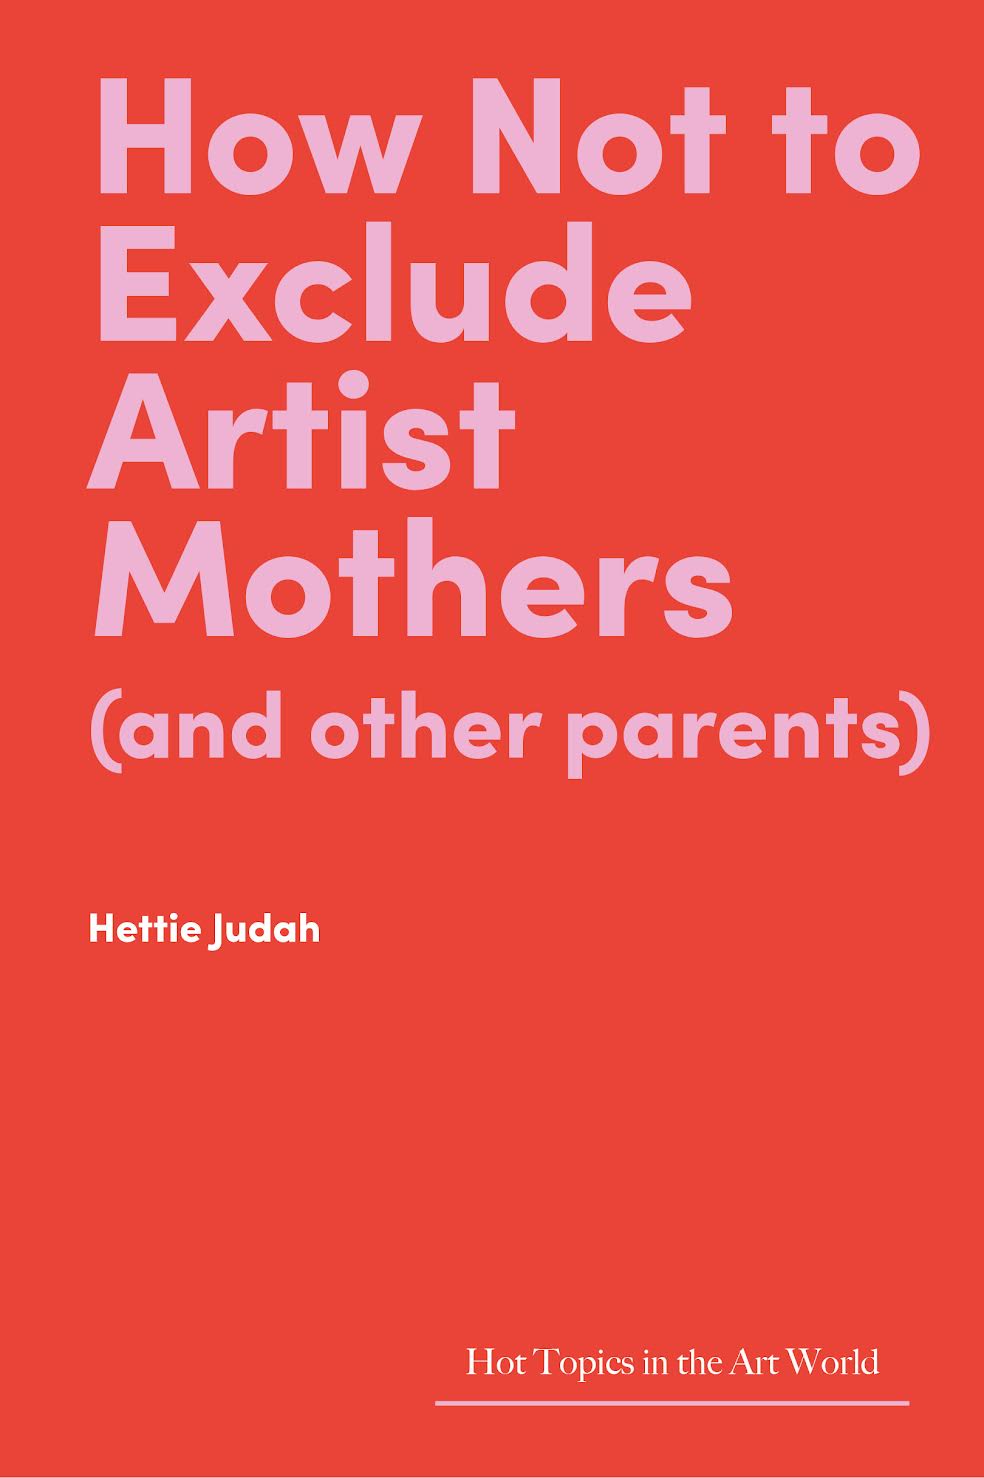 How Not to Exclude Artist Mothers (and other parents)